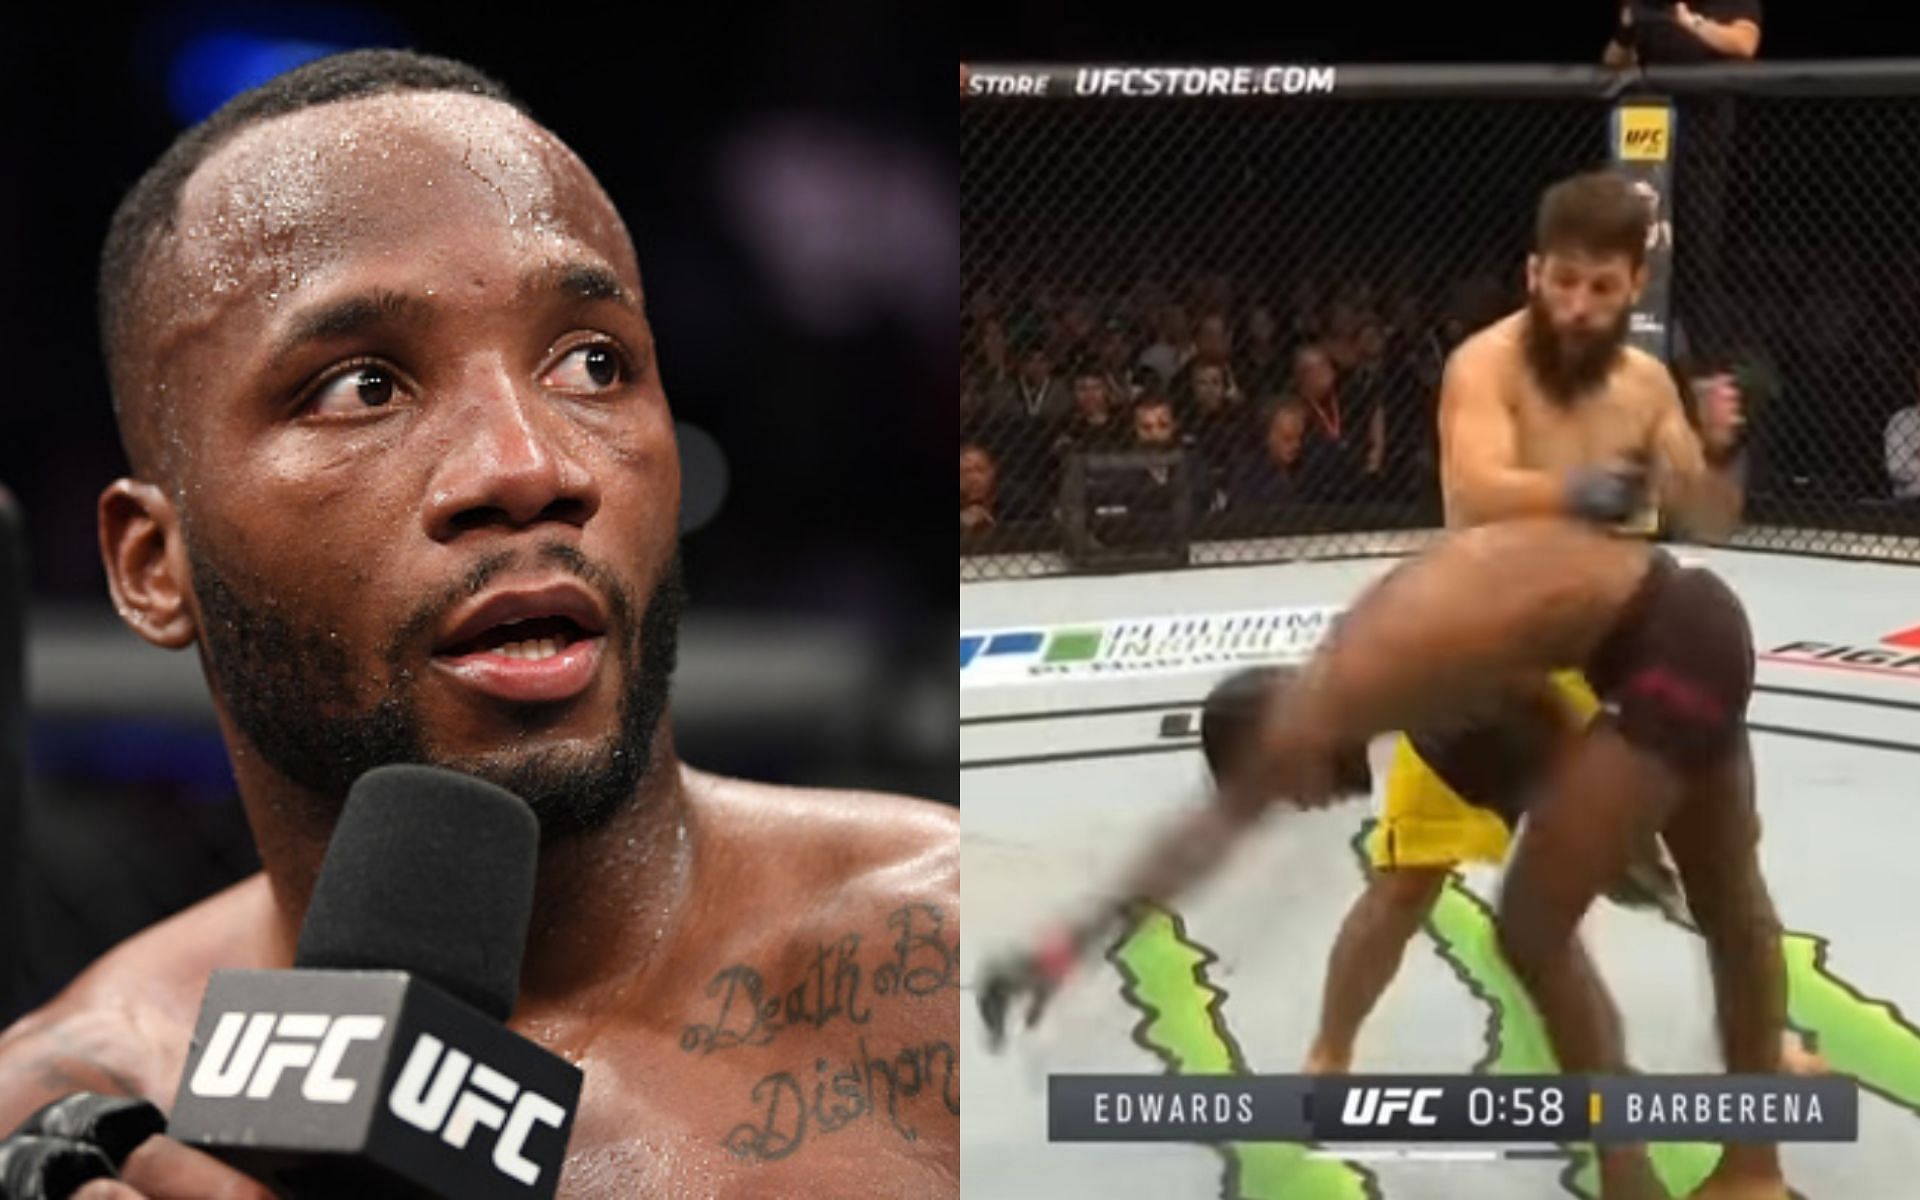 Leon Edwards (left, Image via Getty) and Bryan Barberena almost knocking Edwards out (right, Image via screenshot from YouTube video @TeamSigmaMale)